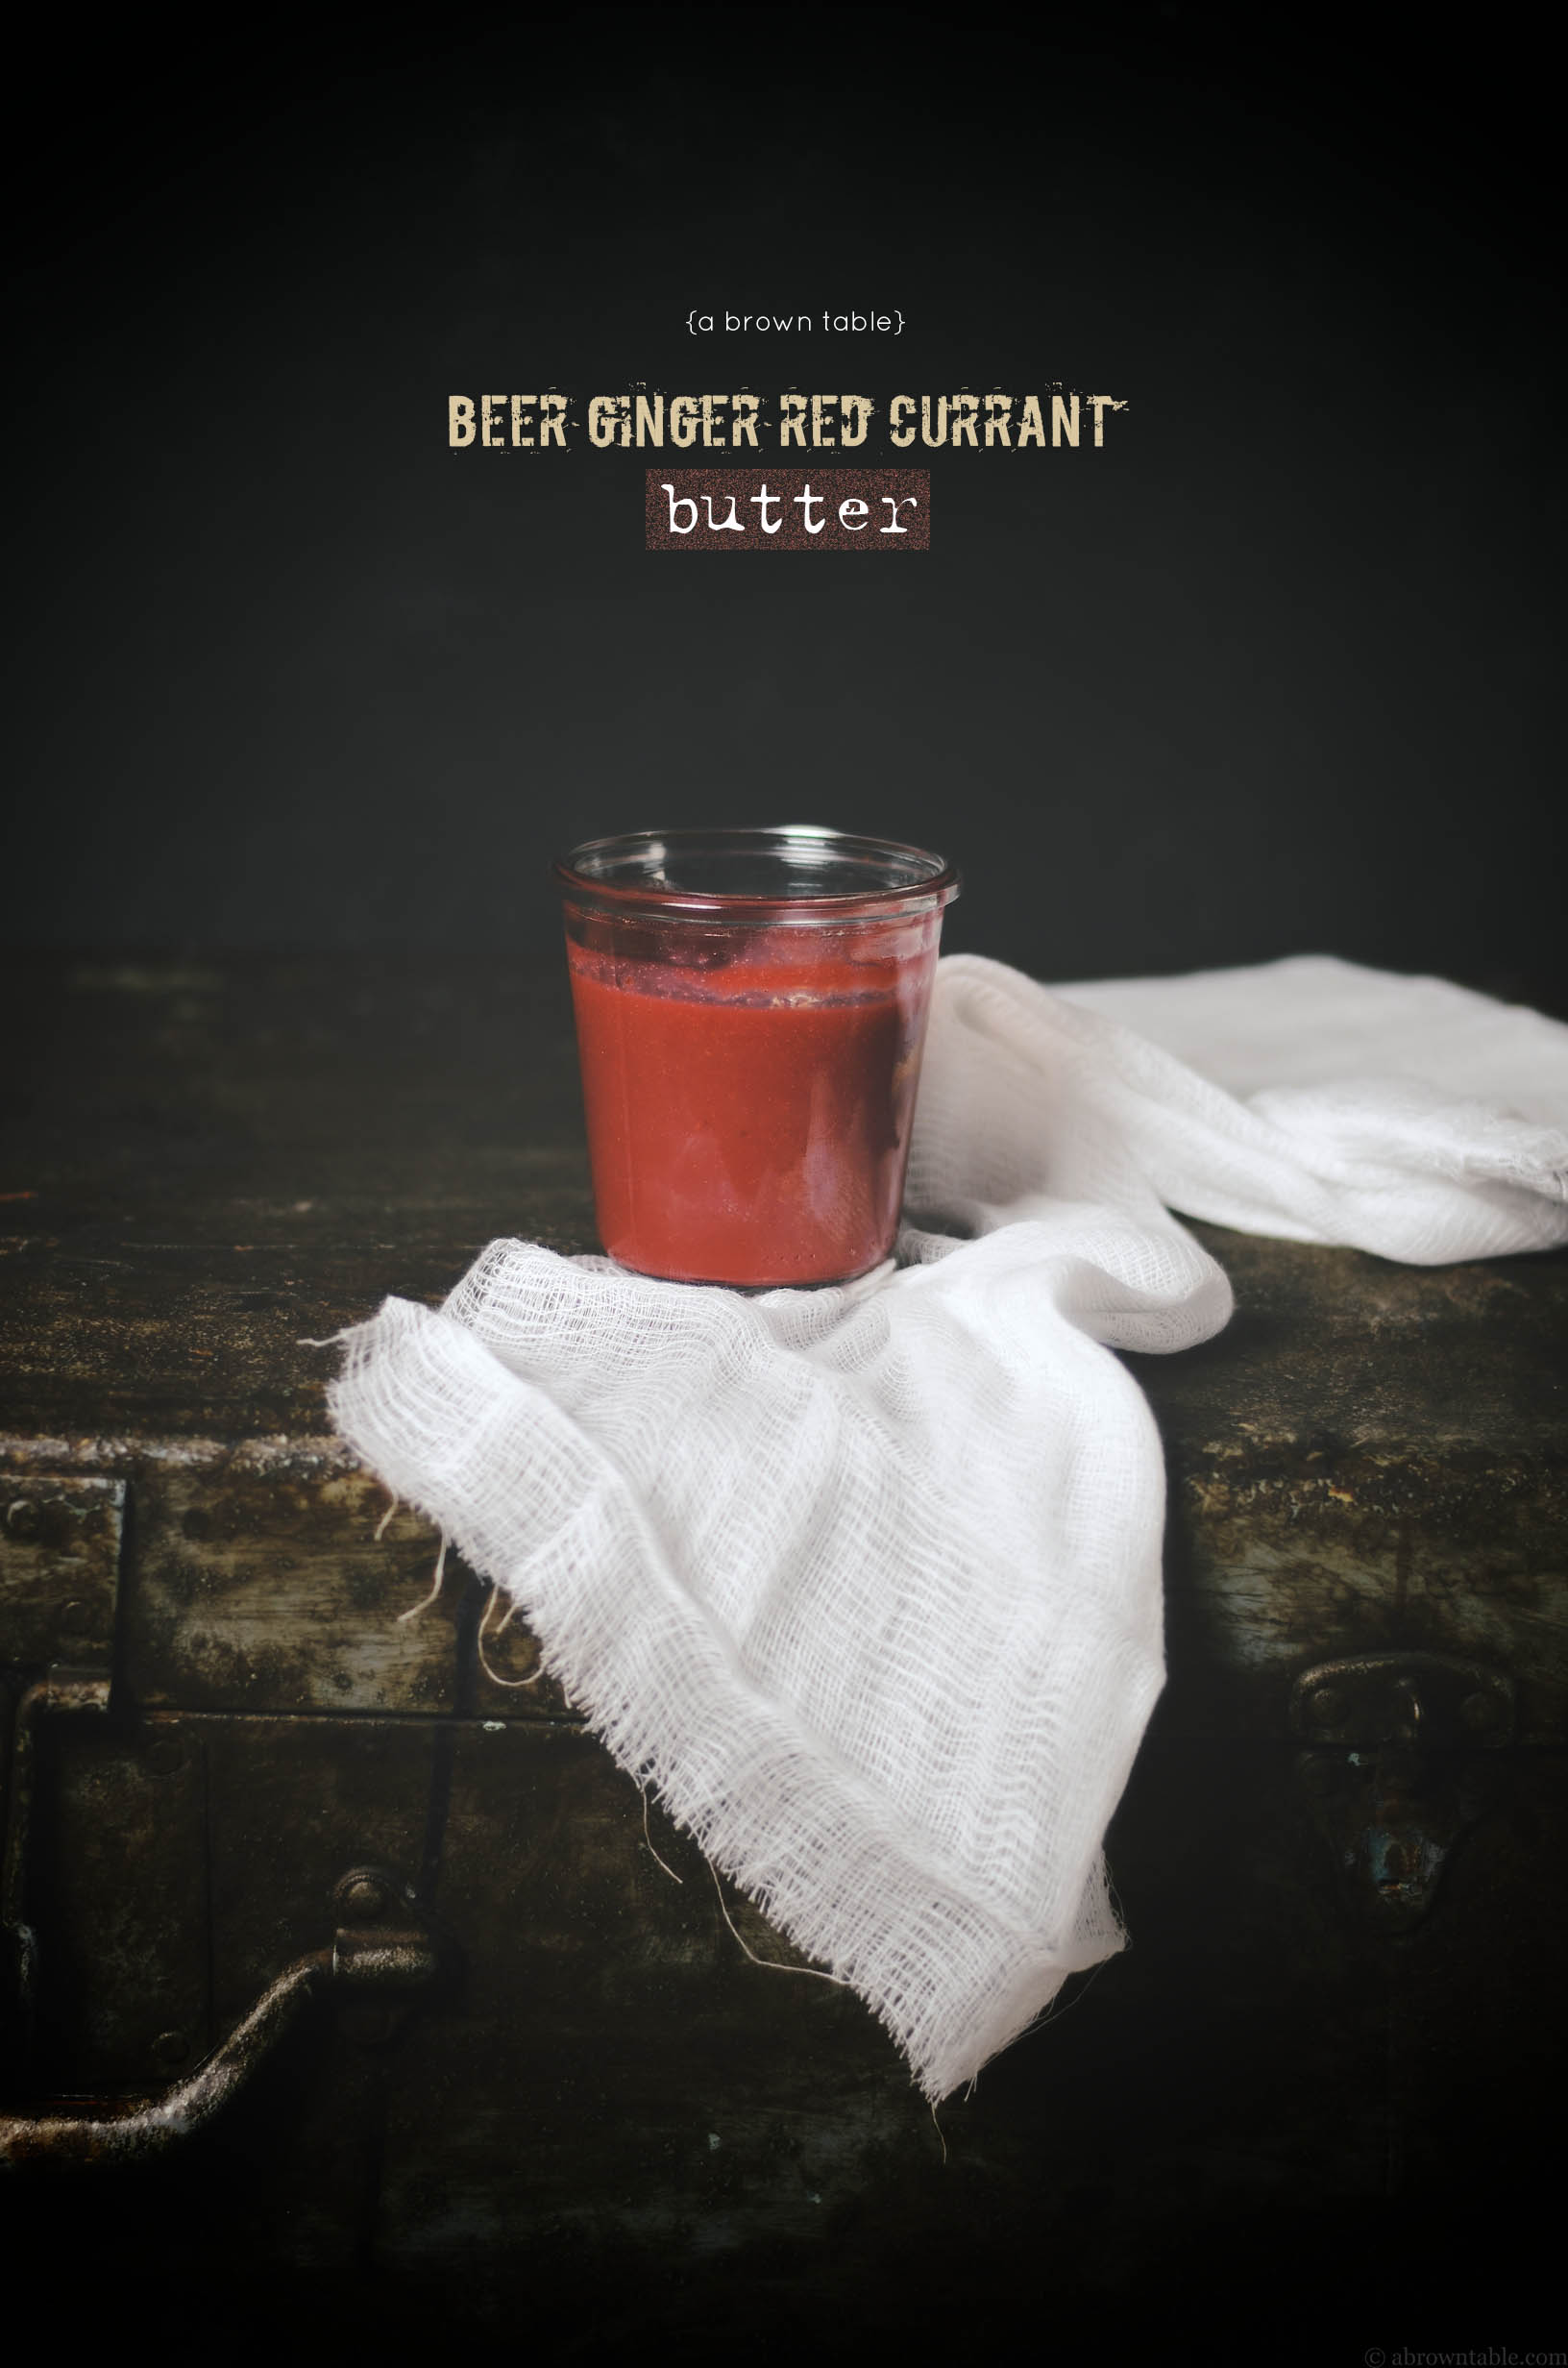 beer ginger red currant butter